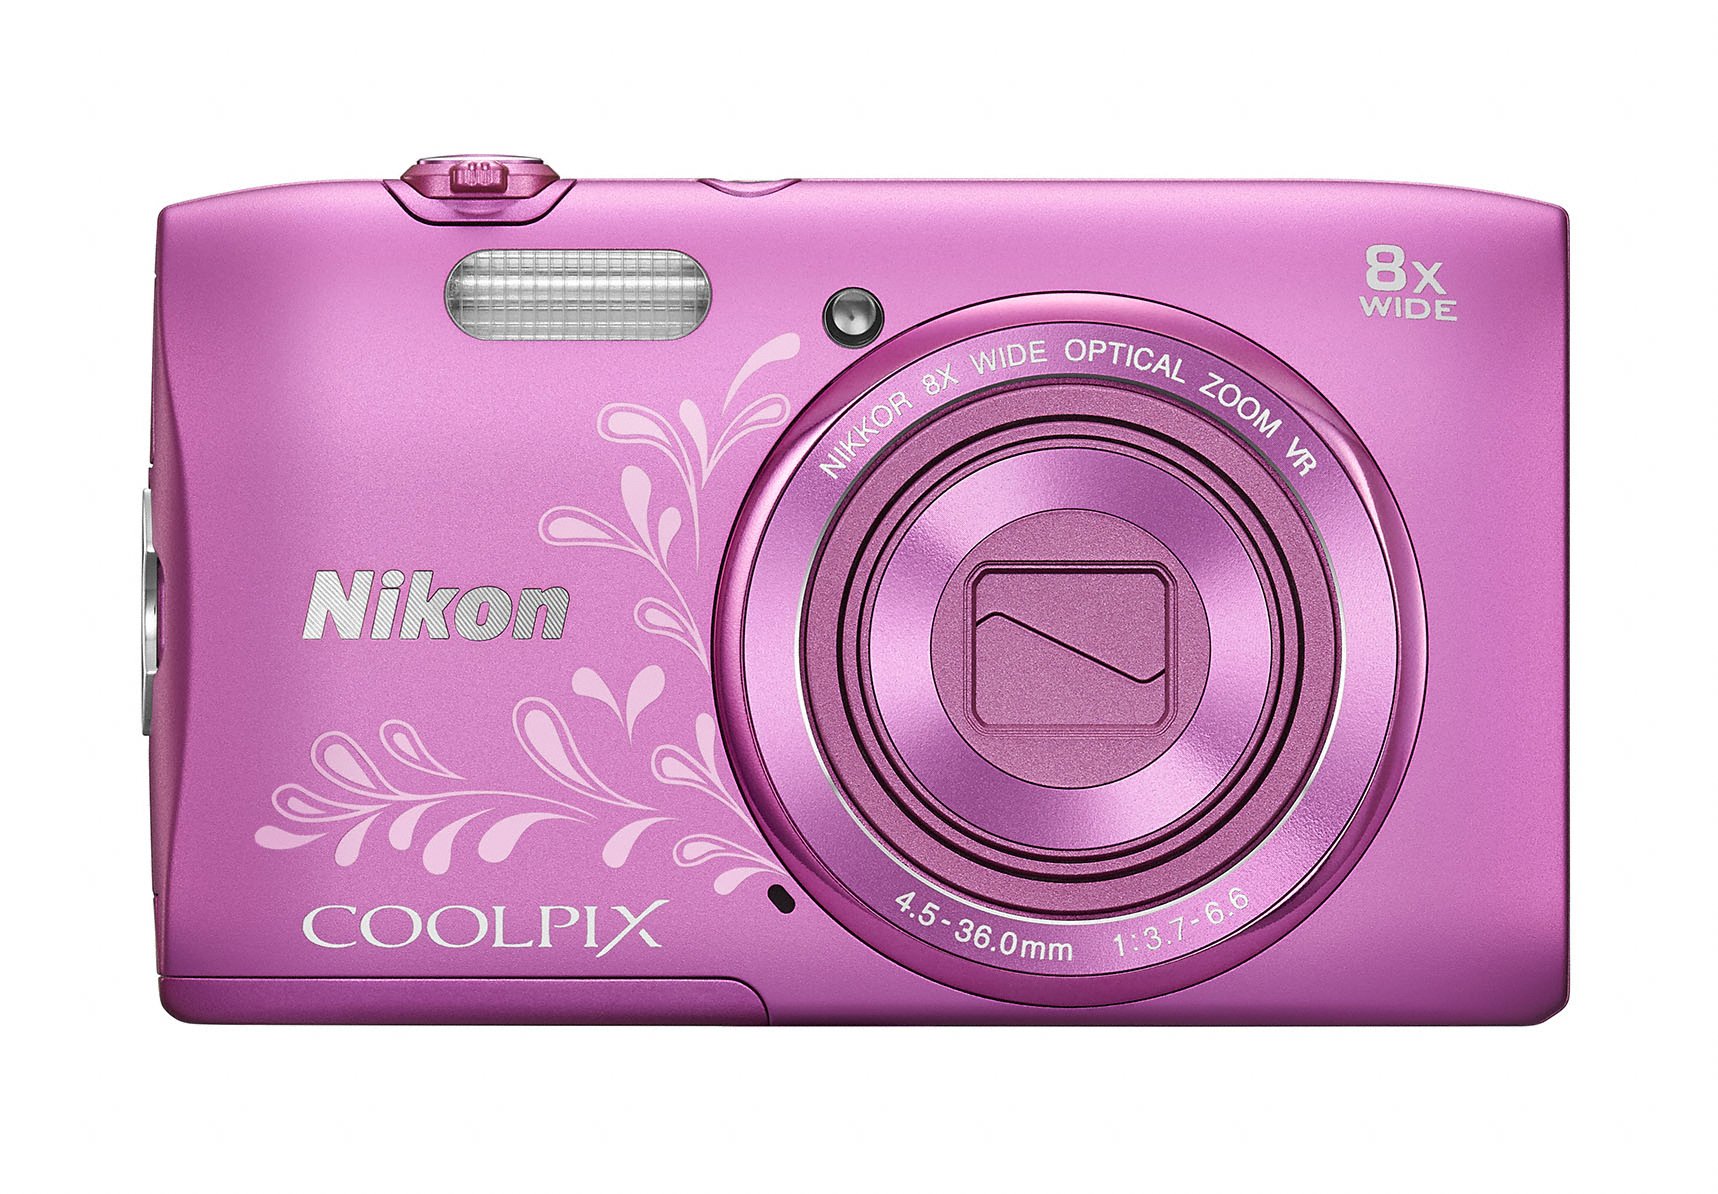 Photo Gallery | COOLPIX S3600 from Nikon